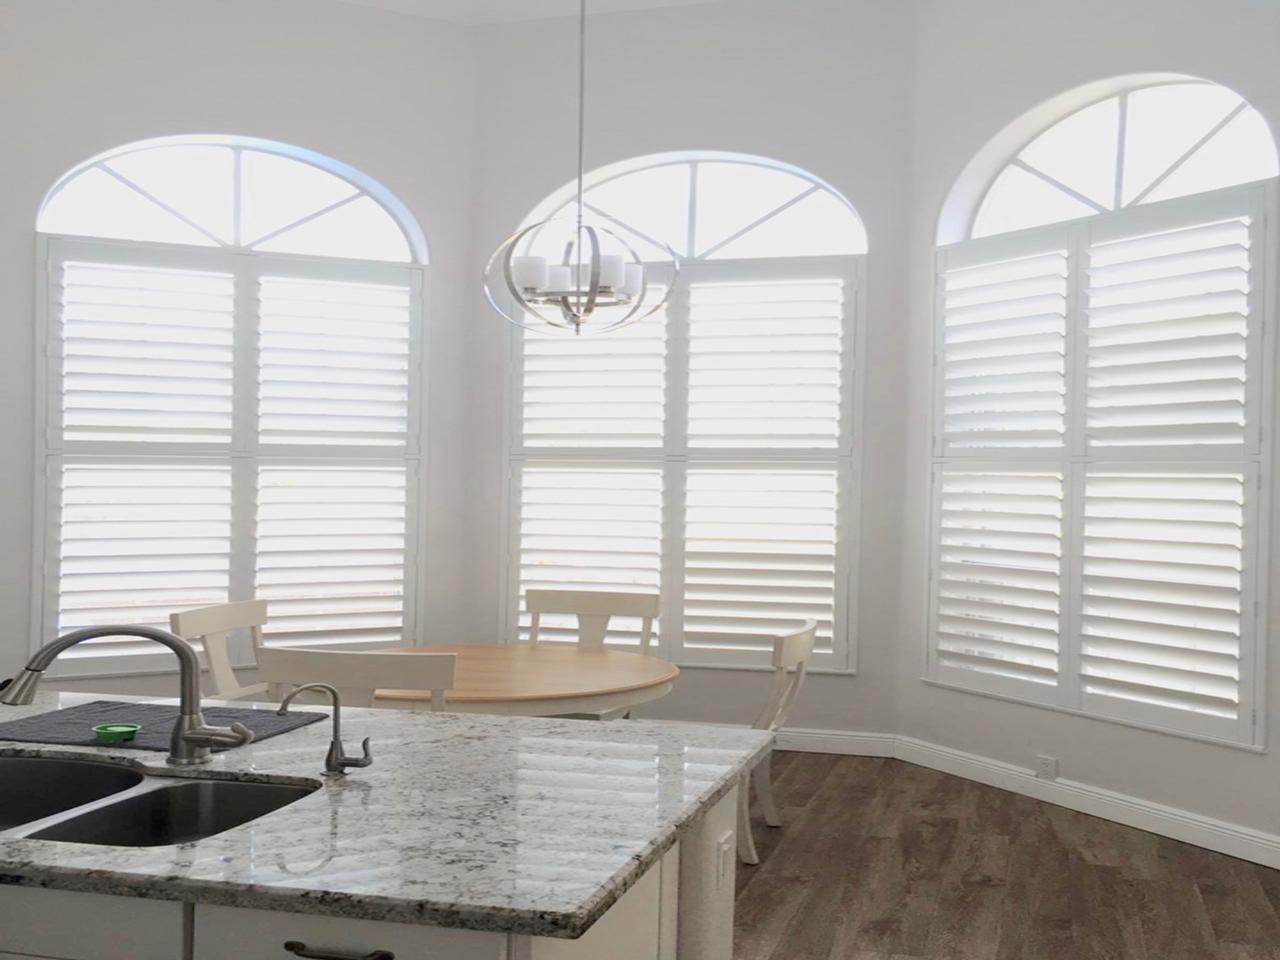 Kitchen dining nook with interior shutters